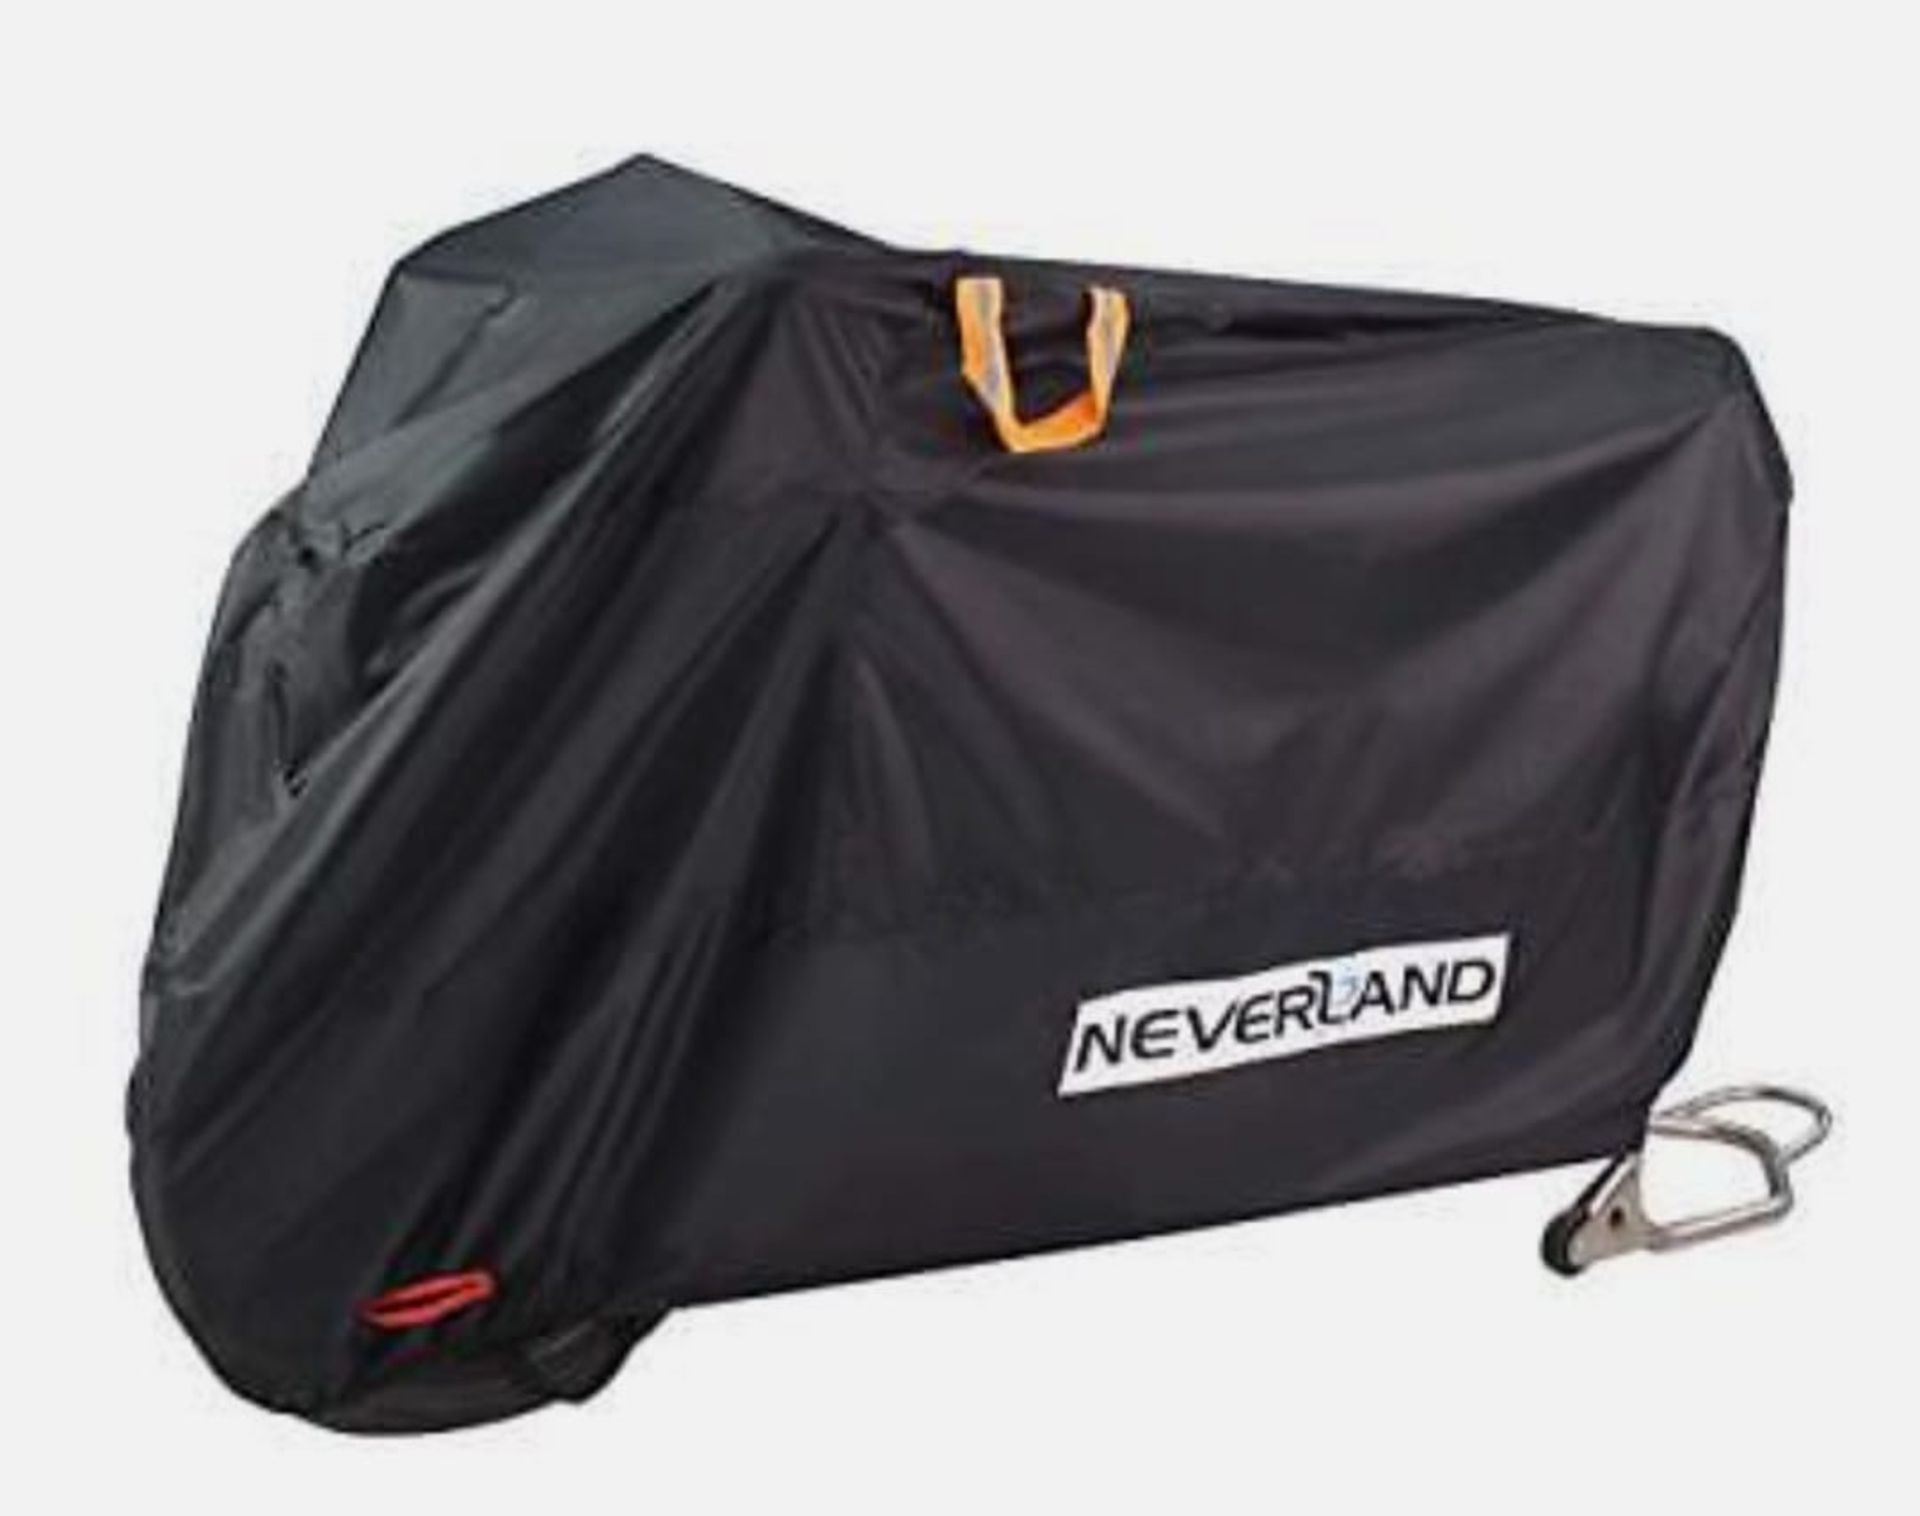 NEVERLAND MOTORBIKE COVER - IMAGES ARE FOR ILLUSTRATIONS PURPOSE ONLY SEE THE SECOND IMAGE, WHICH IS